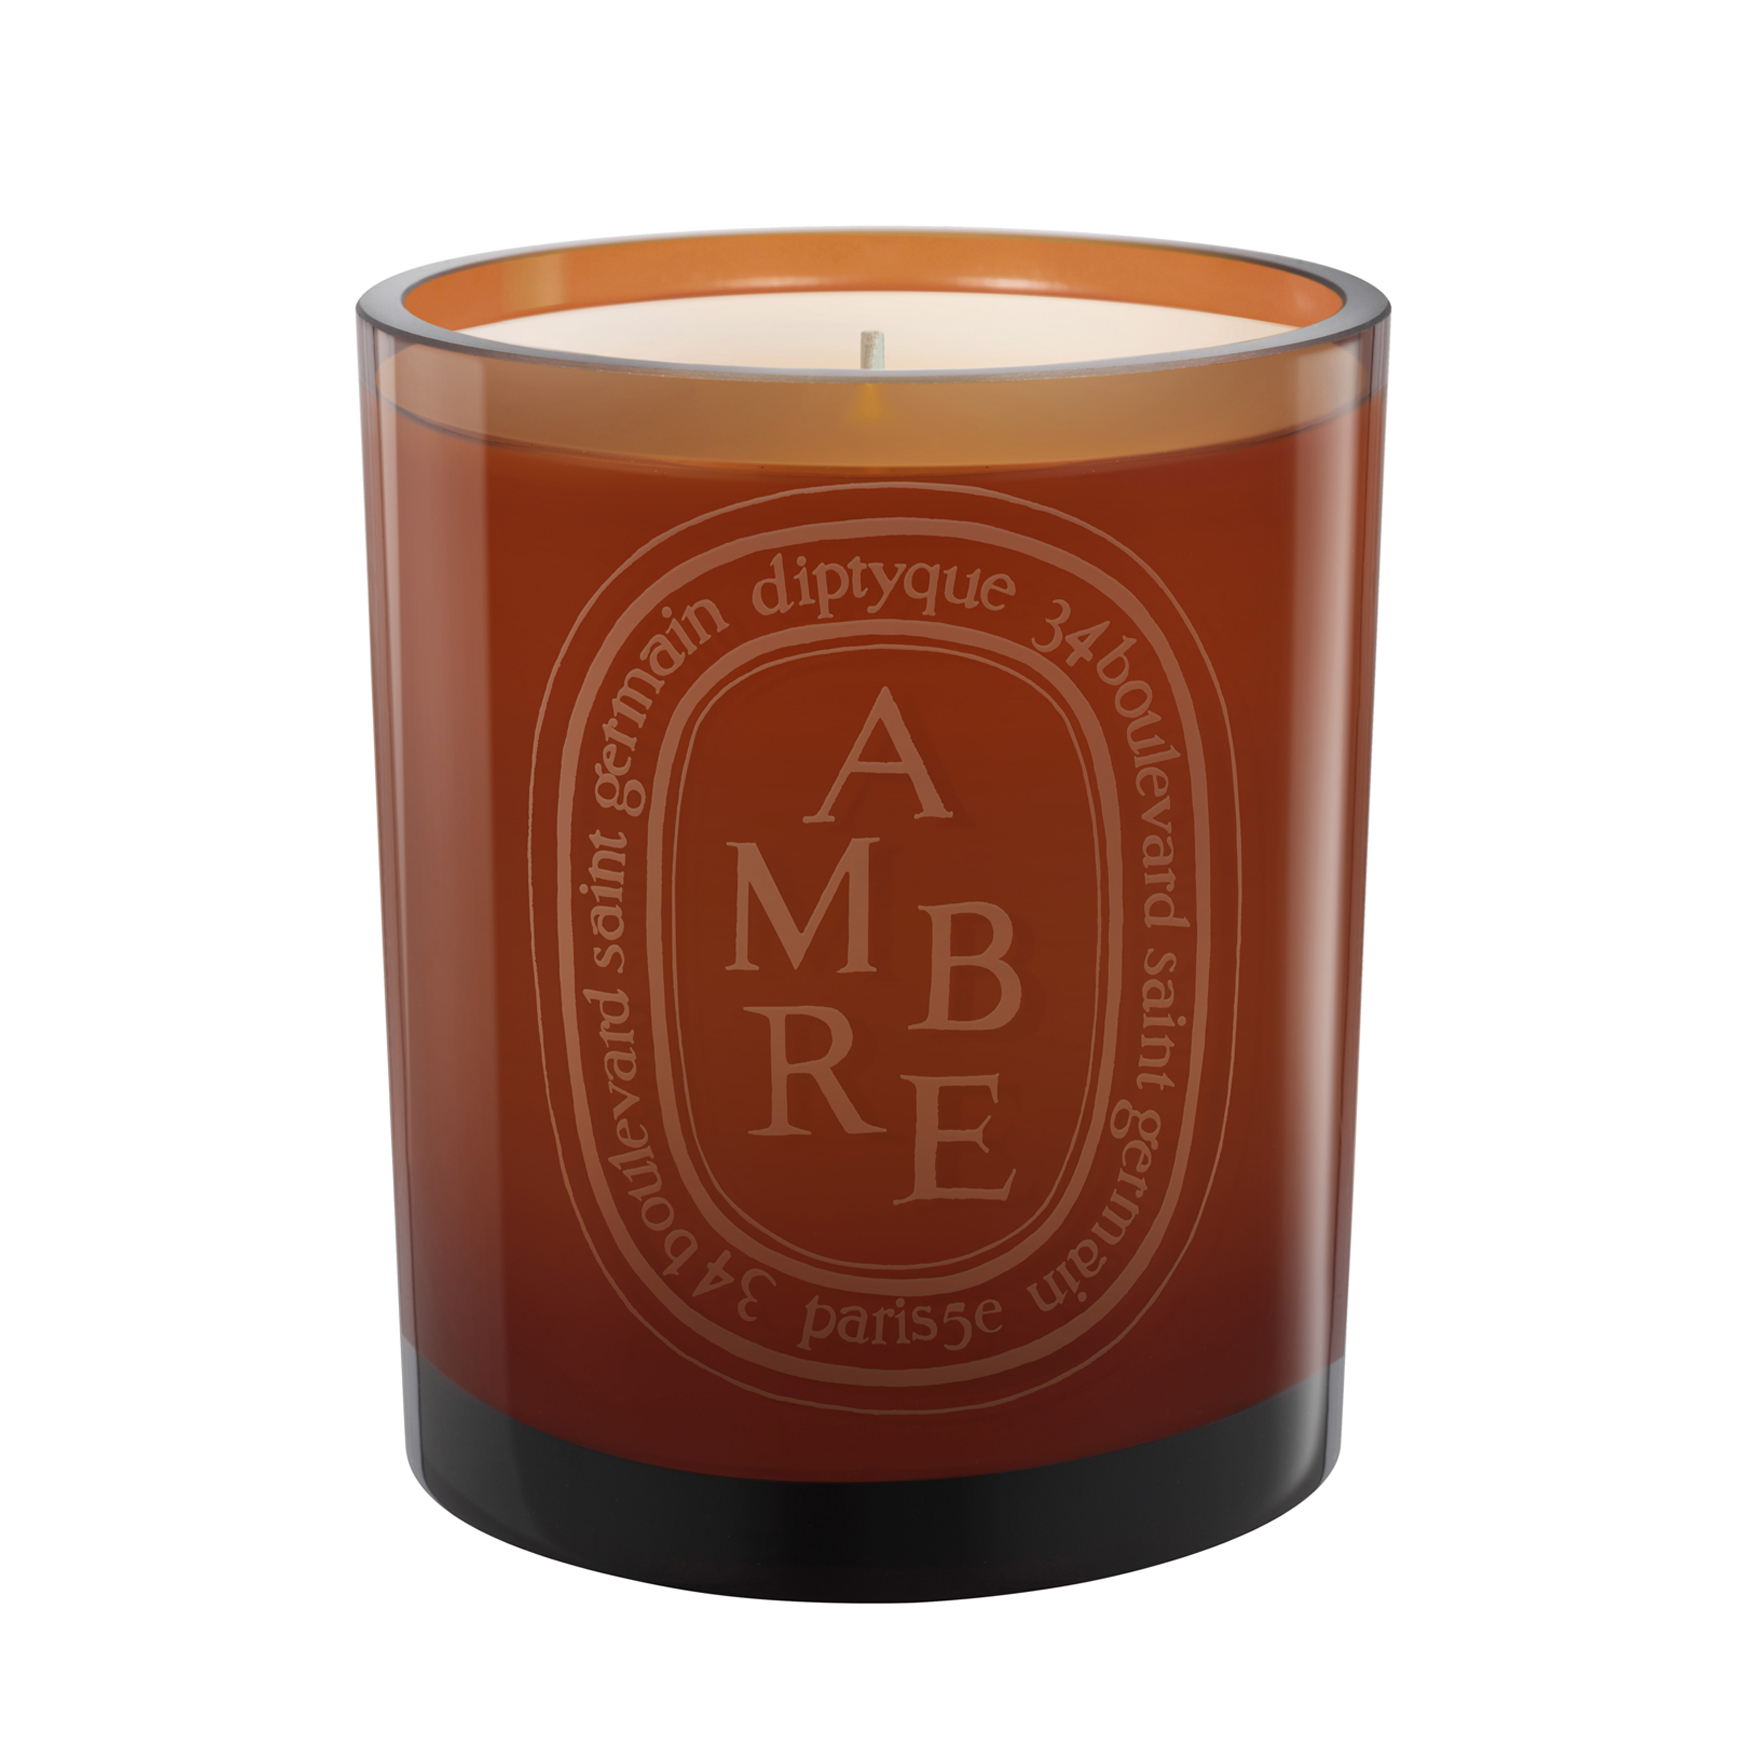 Diptyque Ambre Coloured Candle | Space NK